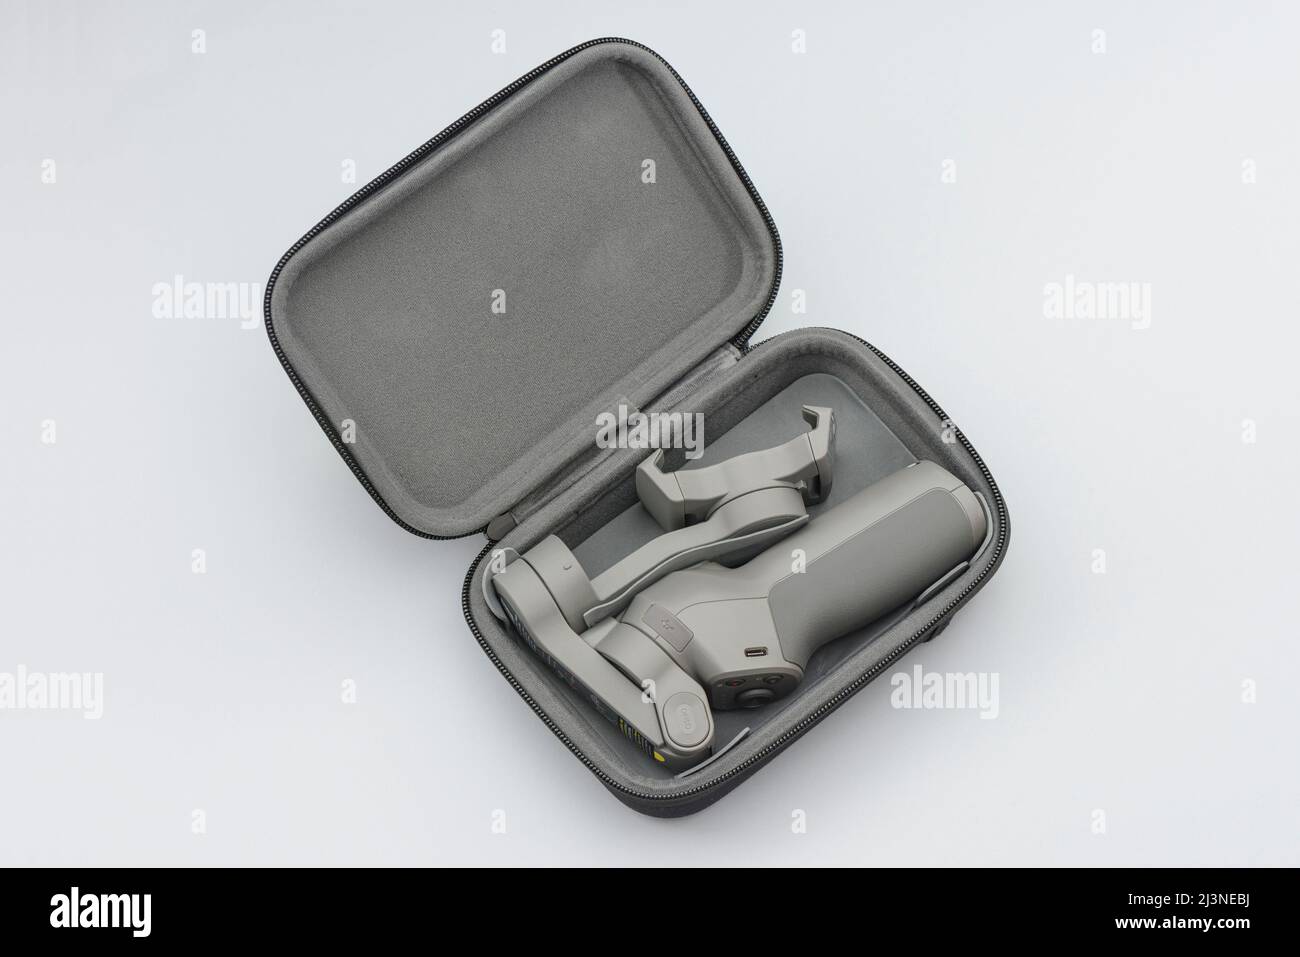 ISTANBULTURKEY-APRIL 1, 2022: DJI Osmo Mobile 3 Combo gimbal and case on  the gray background Stock Photo - Alamy